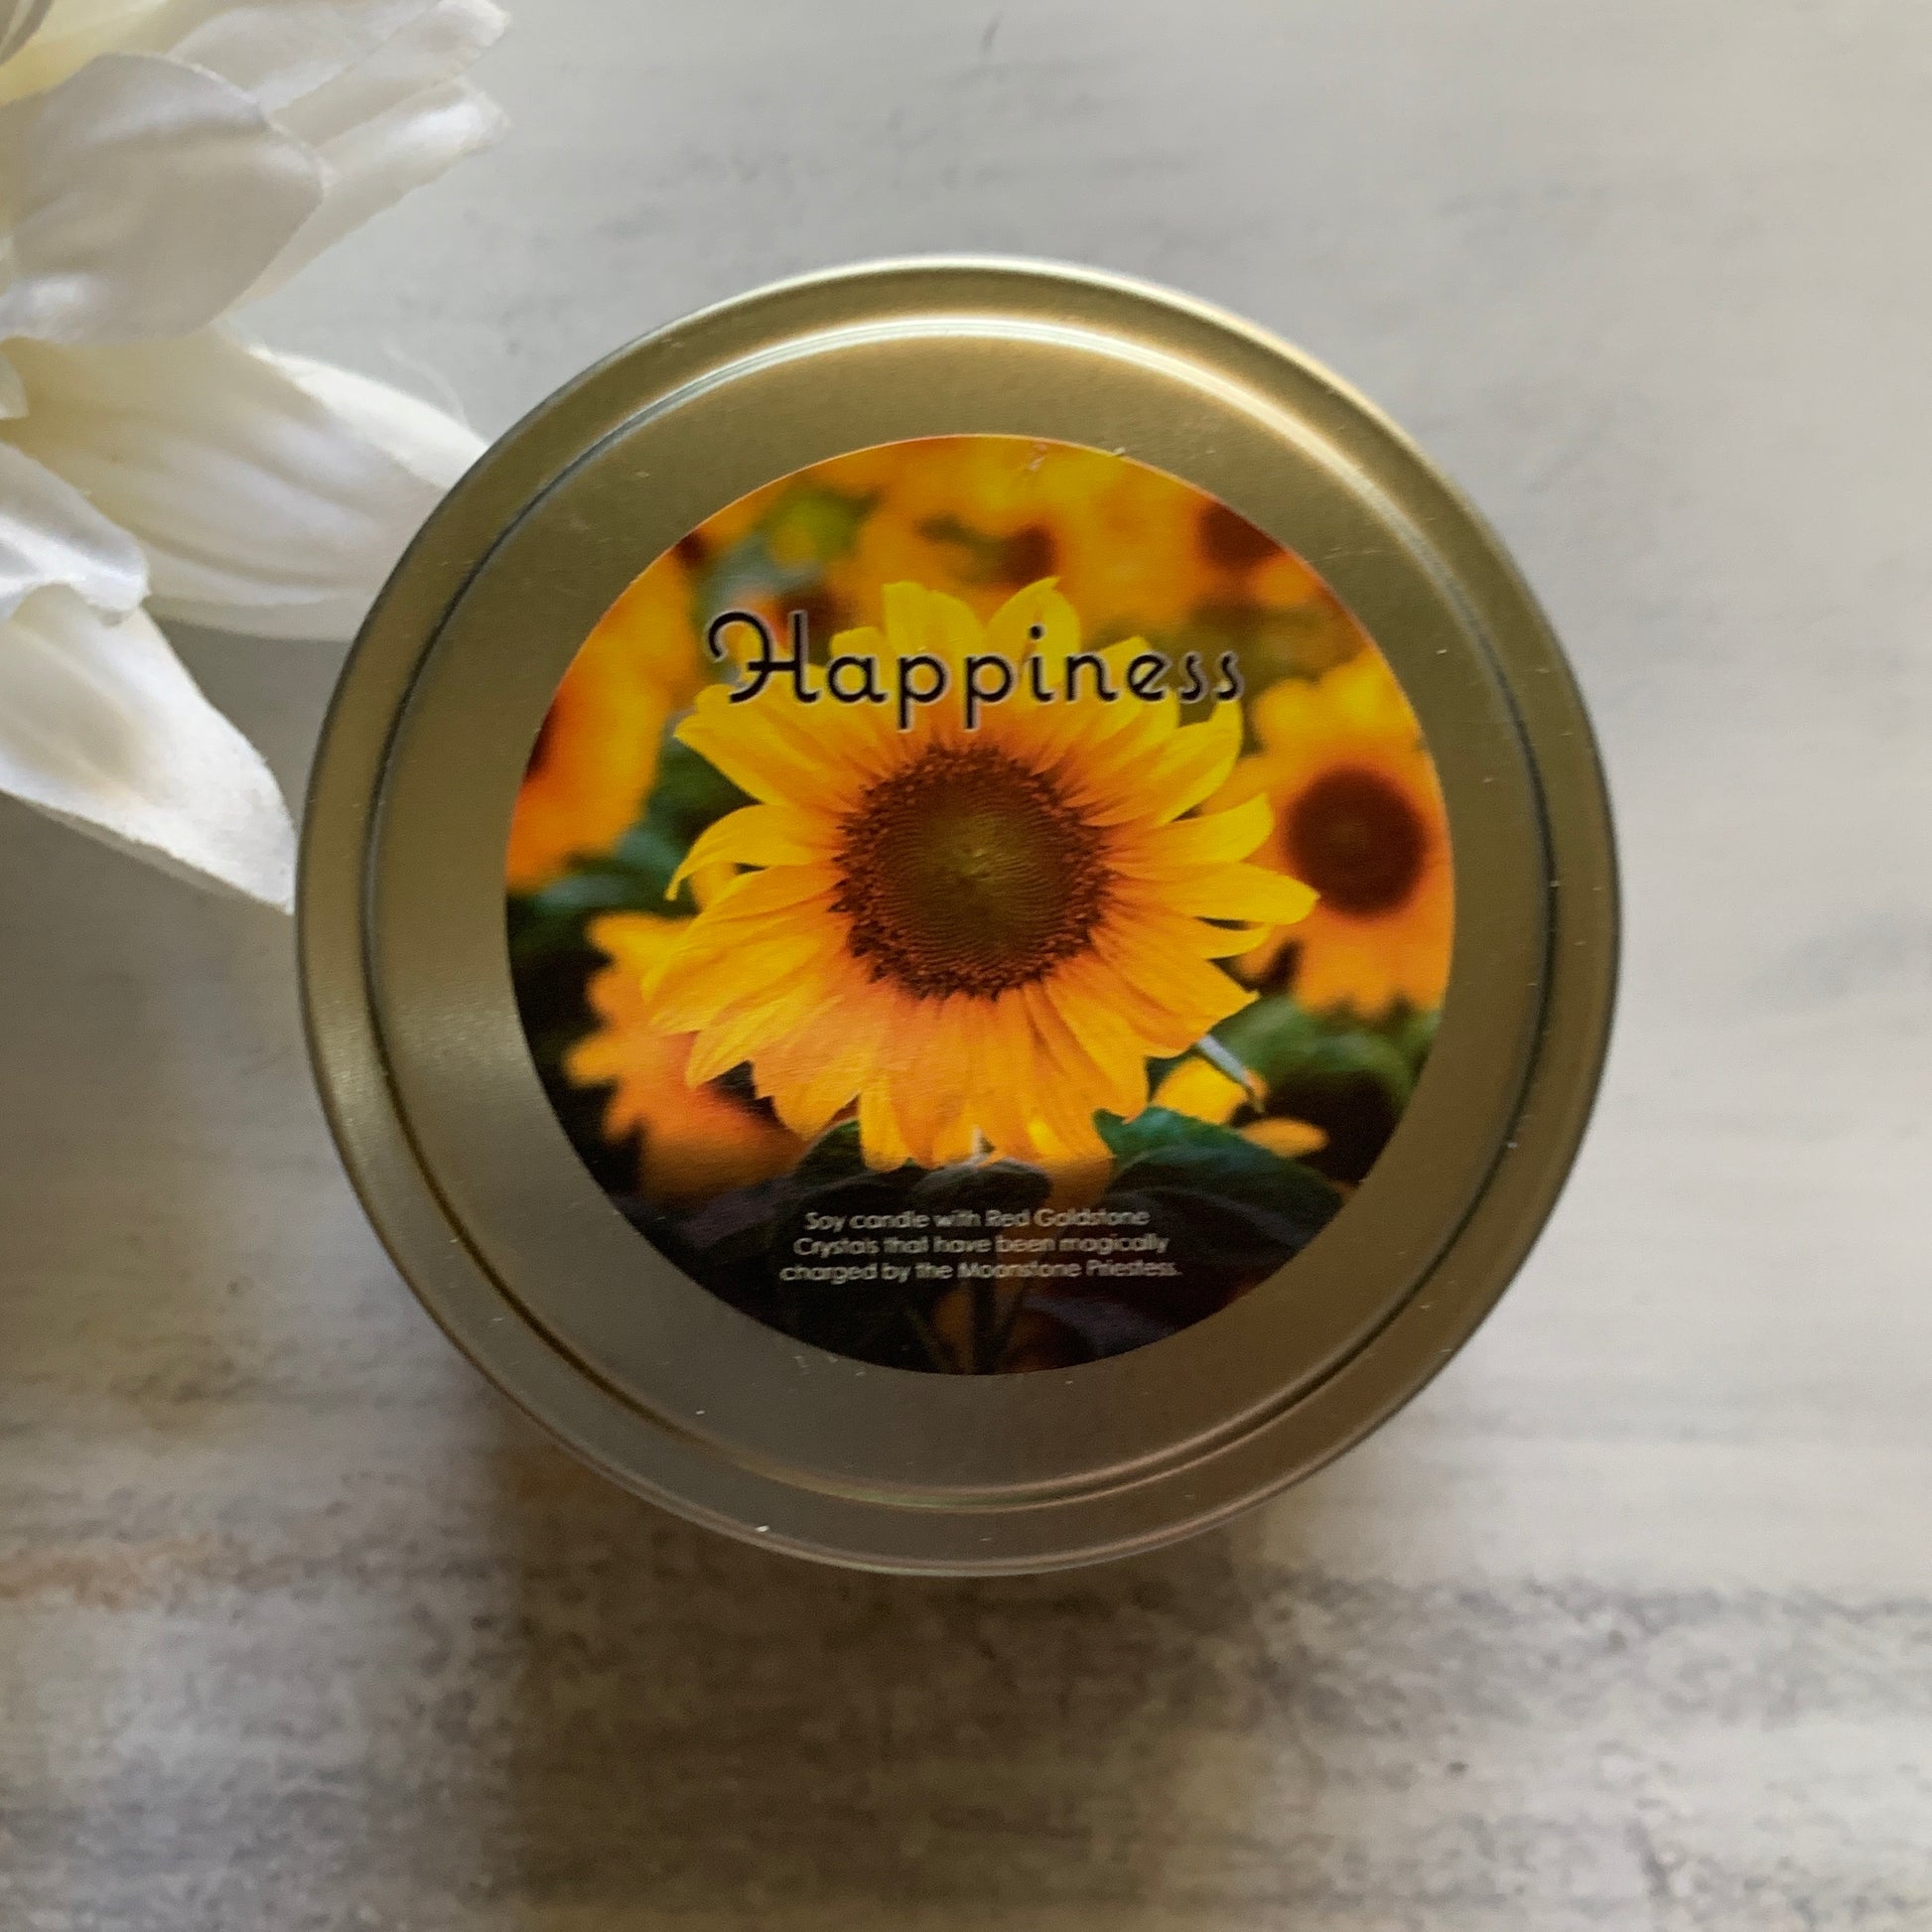 Happiness Candle with Sunstone  Tin Candle